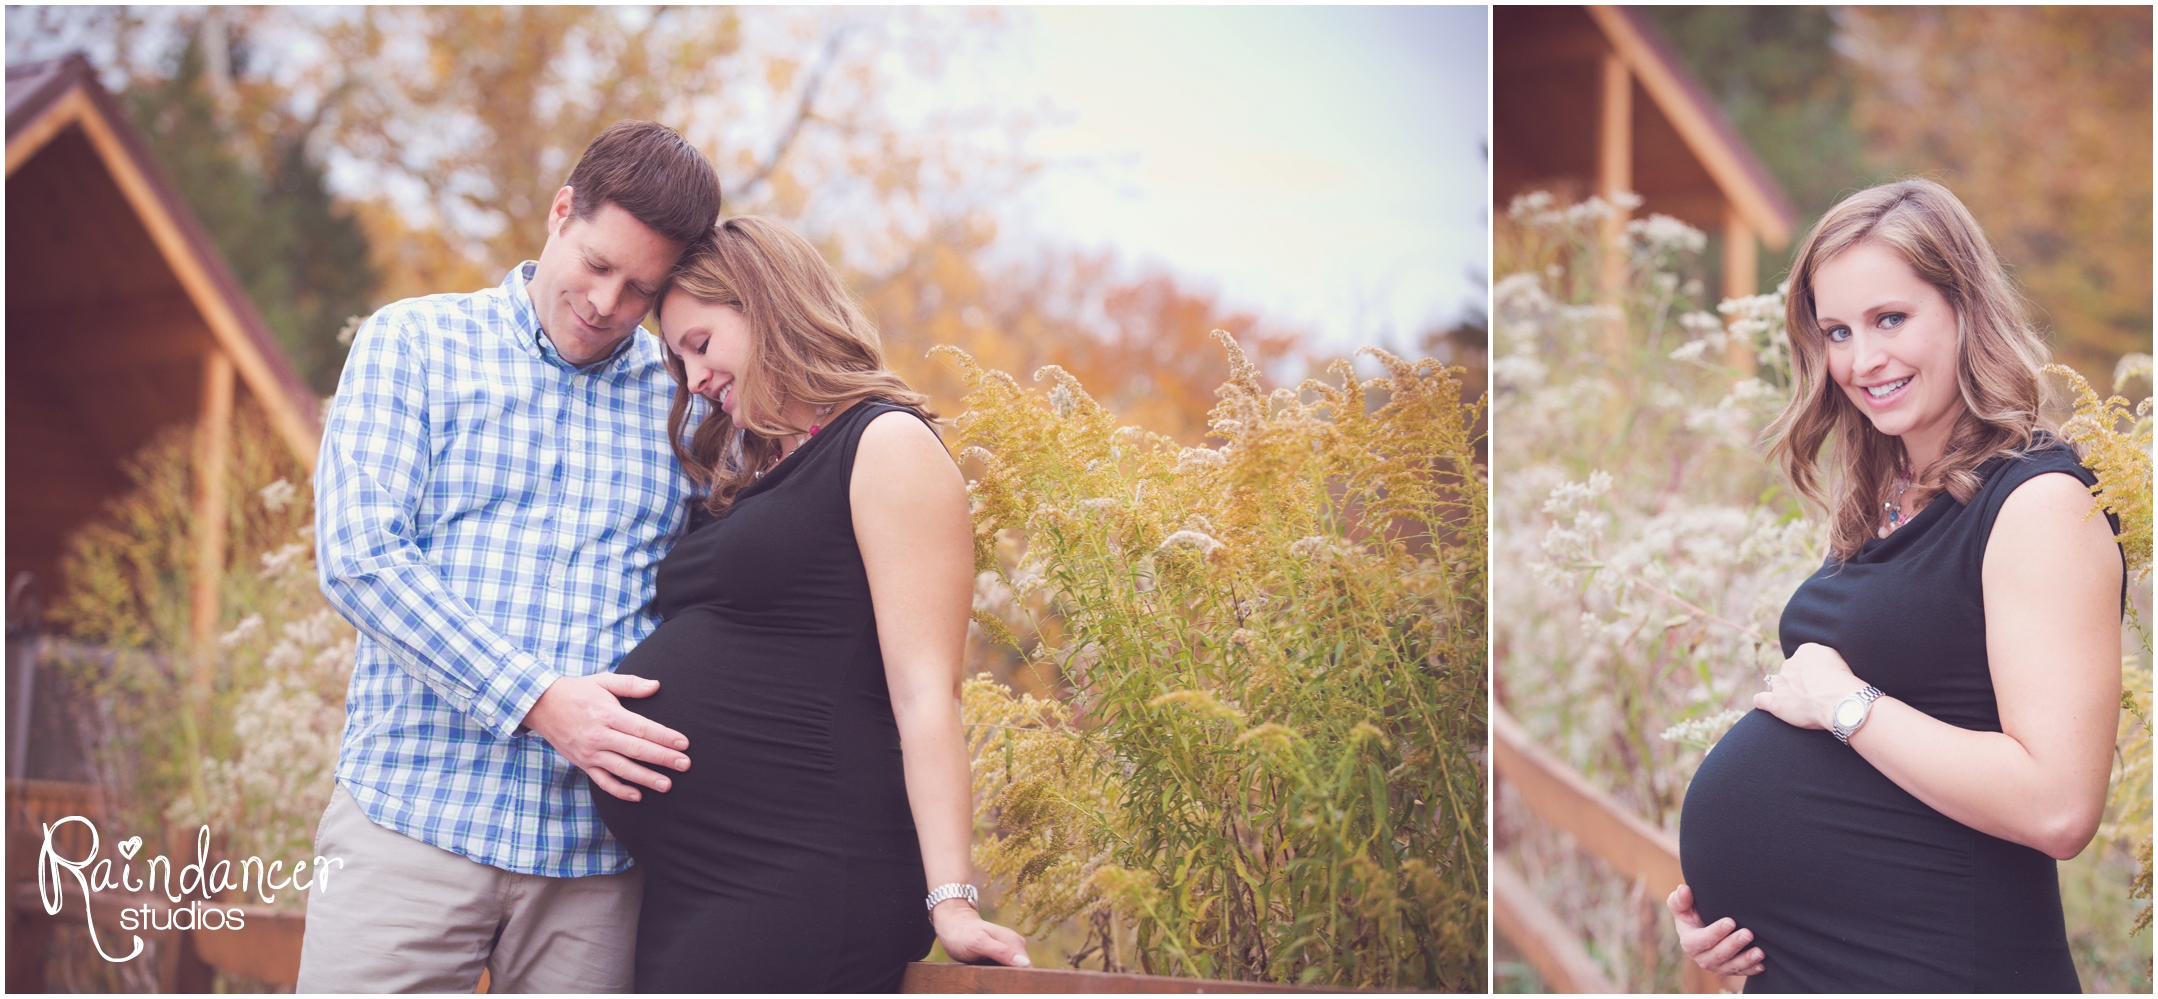 Indianapolis Maternity Photographer, Indy Maternity photographer, Indy maternity photography, Indianapolis maternity photography, Indy newborn photograher, Indianapolis newborn photographer, Indianapolis Grow With Me Baby Sessions